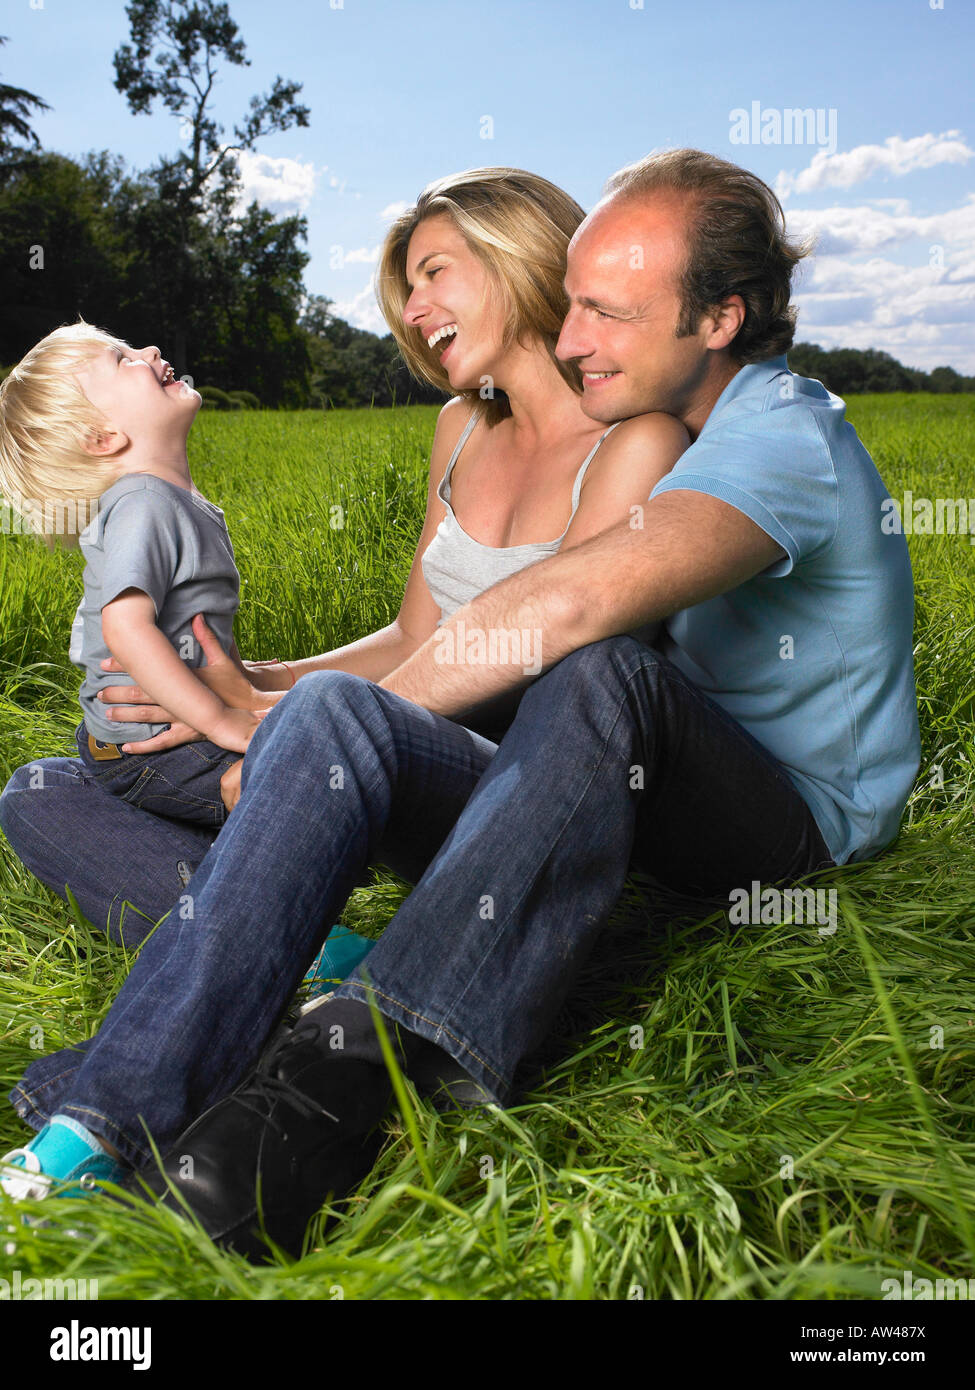 Family enjoying a good time in a field. Stock Photo